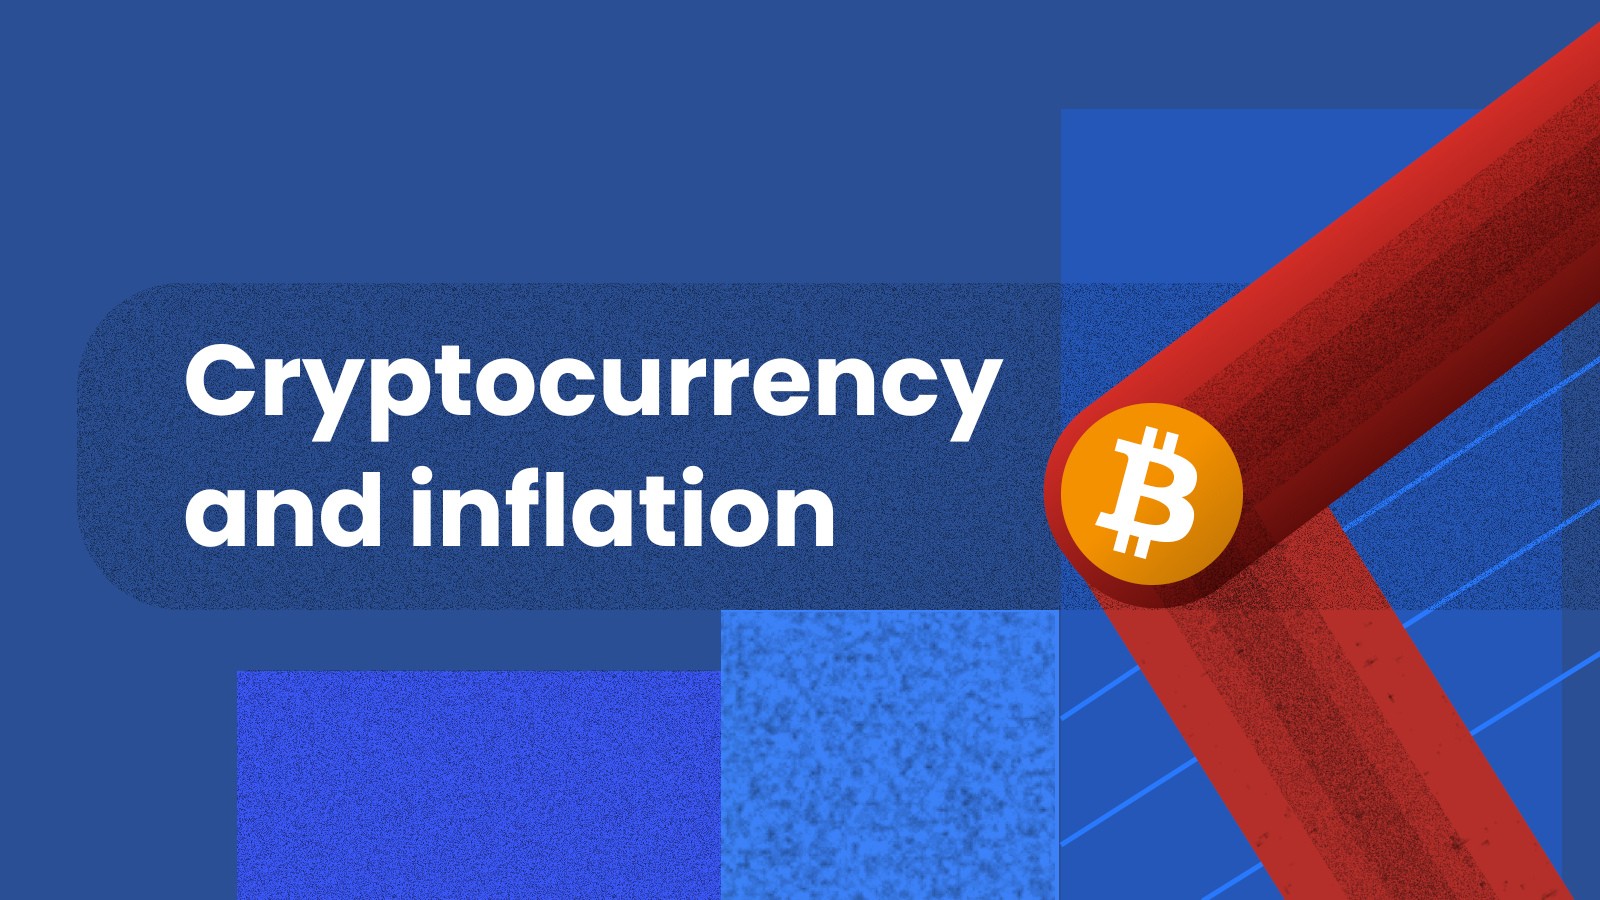 How Does Inflation Affect Cryptocurrency